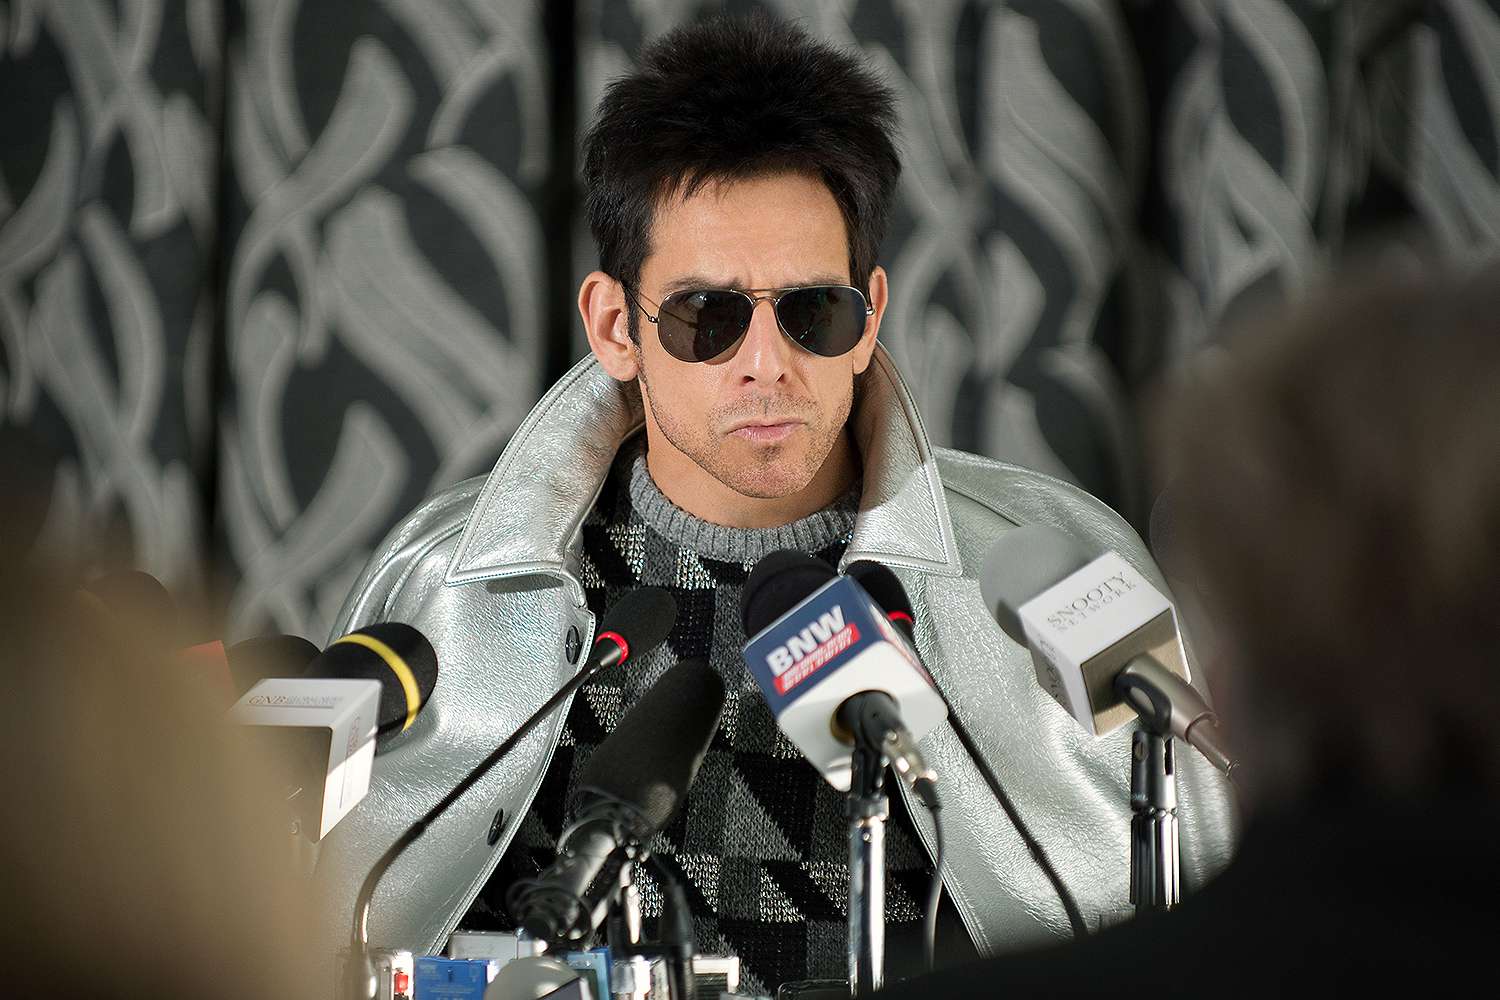 Ben Stiller Says He Was 'Shook' by Negative Zoolander 2 レビュー: 'Makes You Question' Things